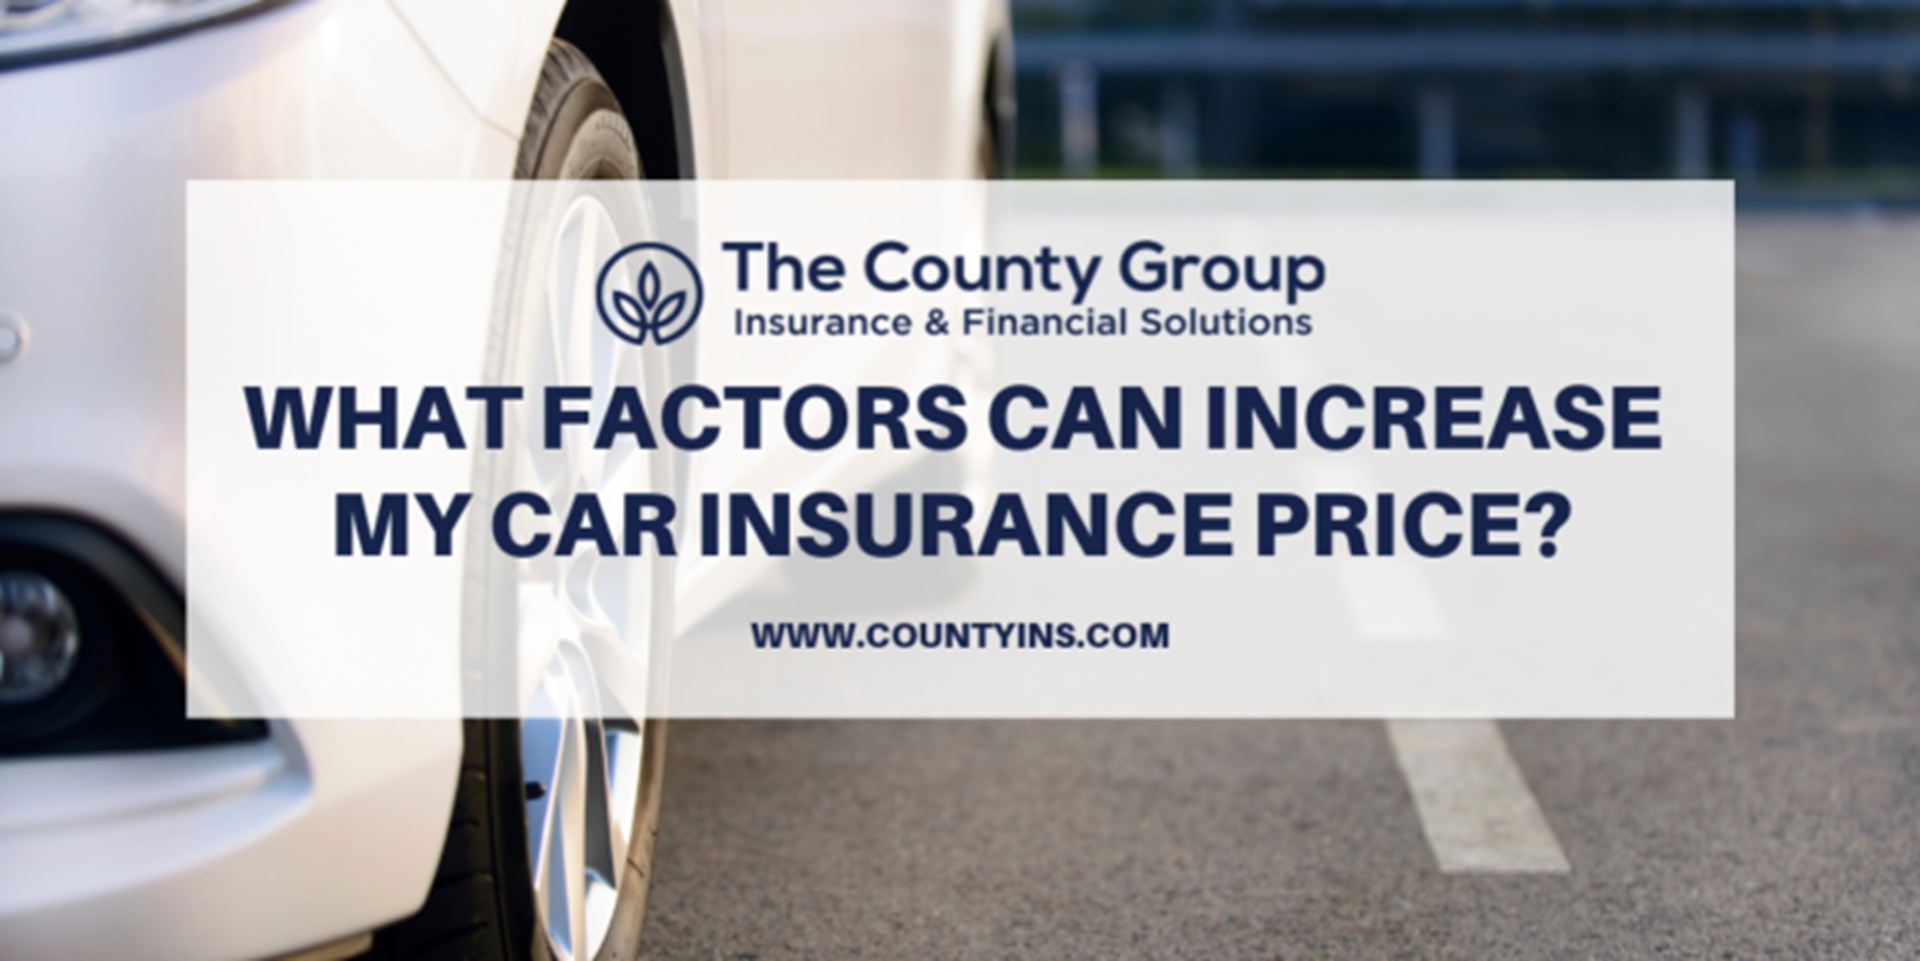 What factors can increase my car insurance price?